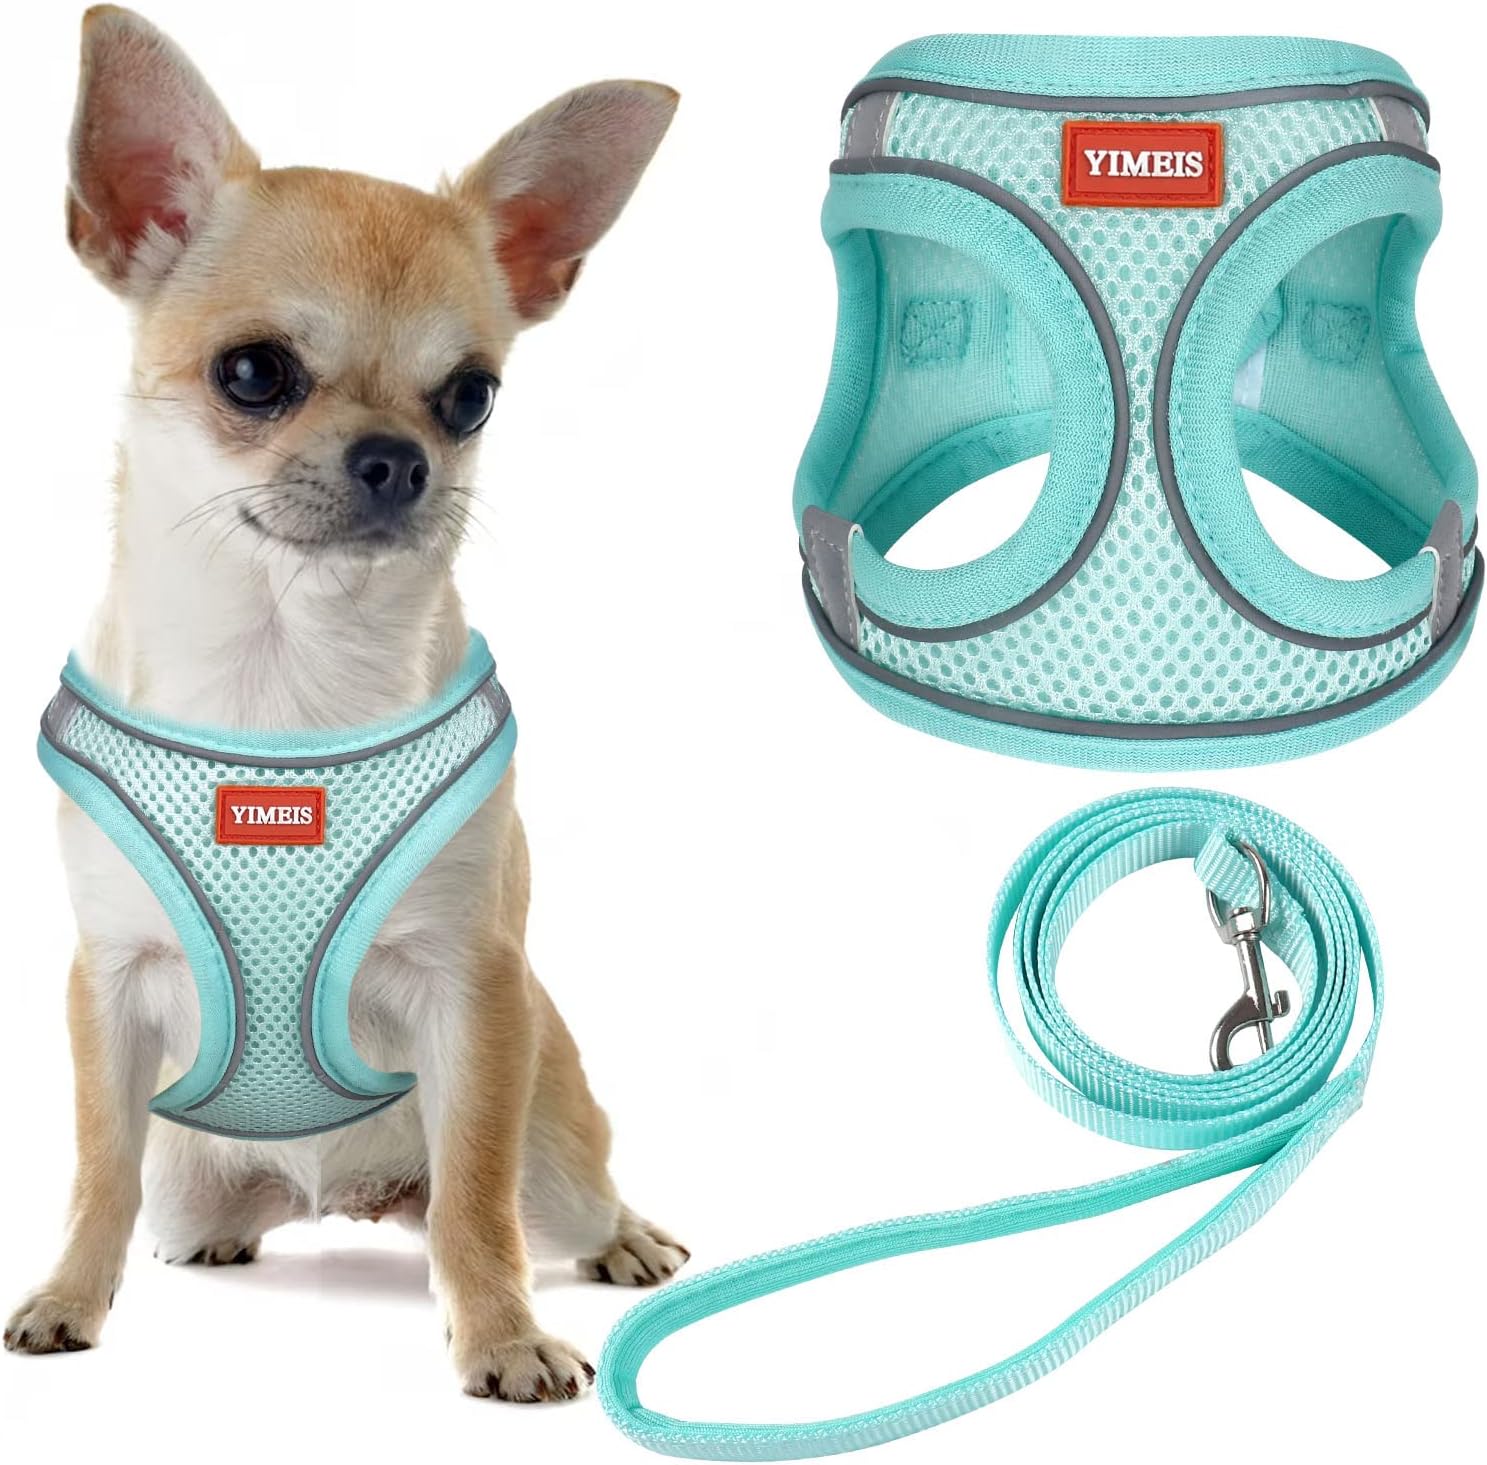 YIMEIS Dog Harness and Leash Set, No Pull Soft Mesh Pet Harness, Reflective Adjustable Puppy Vest for Small Medium Large Dogs, Cats (Tiffany Blue, Small (Pack of 1)